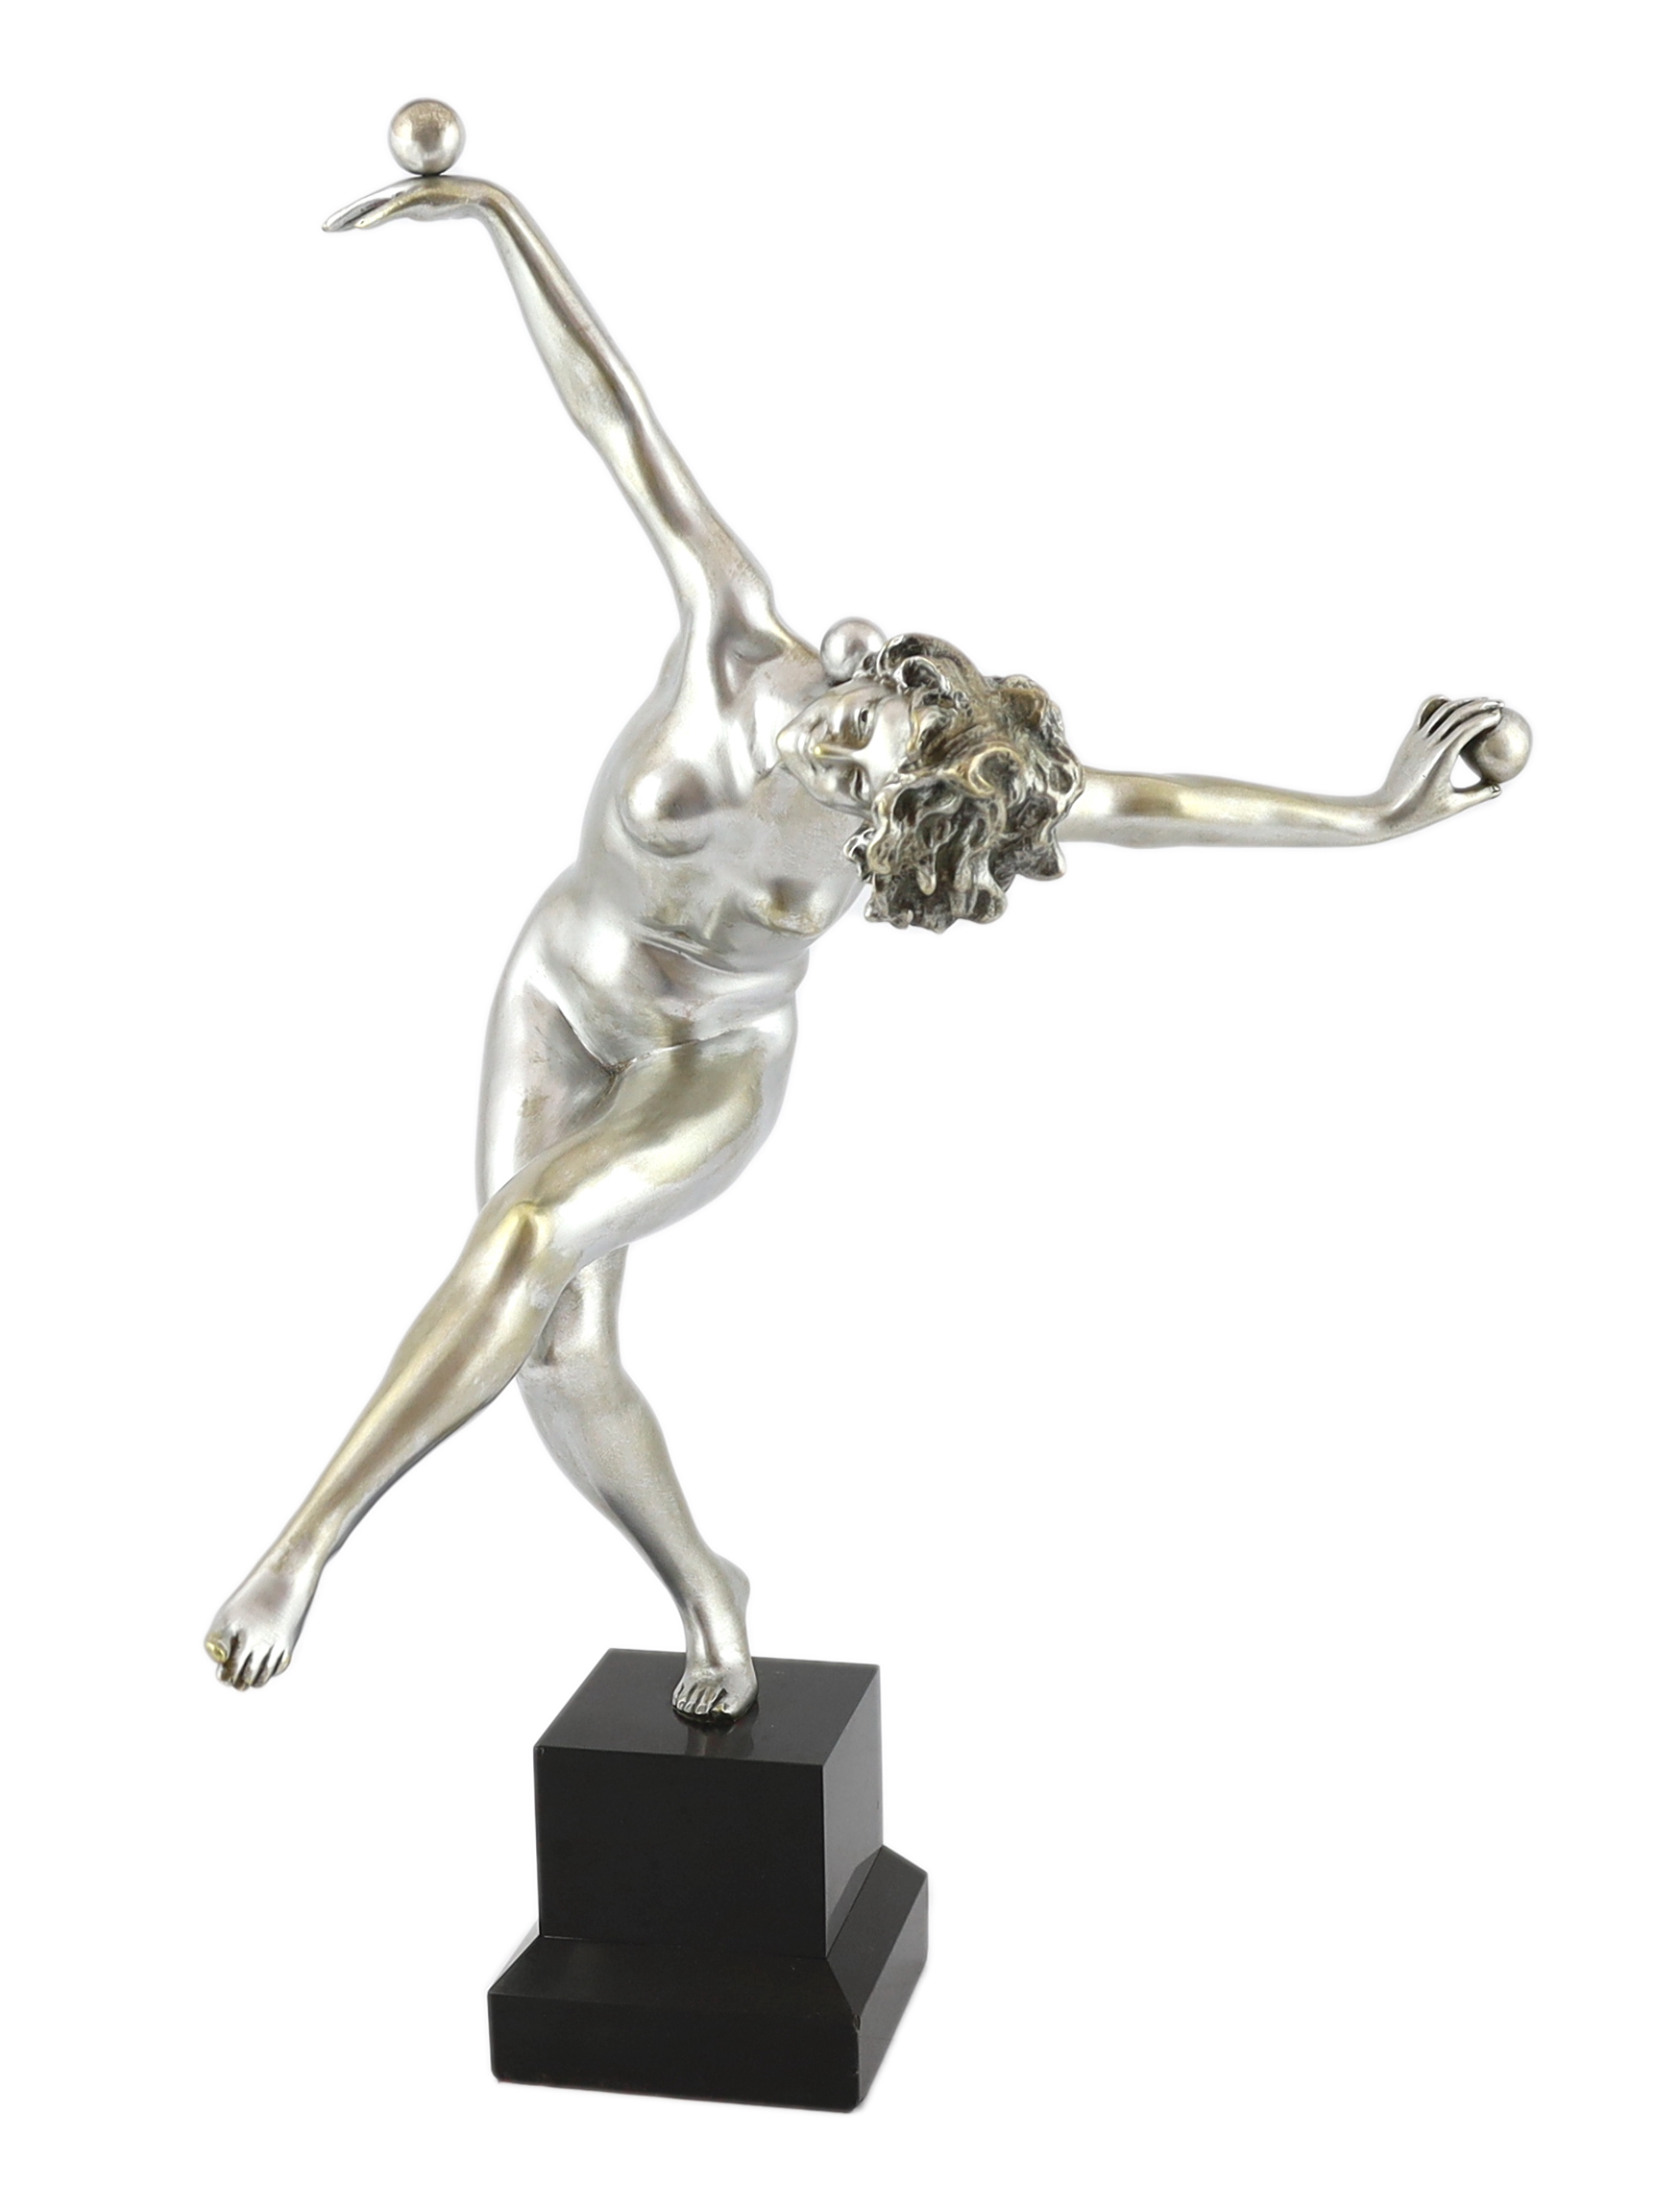 Attributed to Claire Colinet, an Art Deco silvered bronze figure of a nude acrobatic dancer, overall 53cm high                                                                                                              